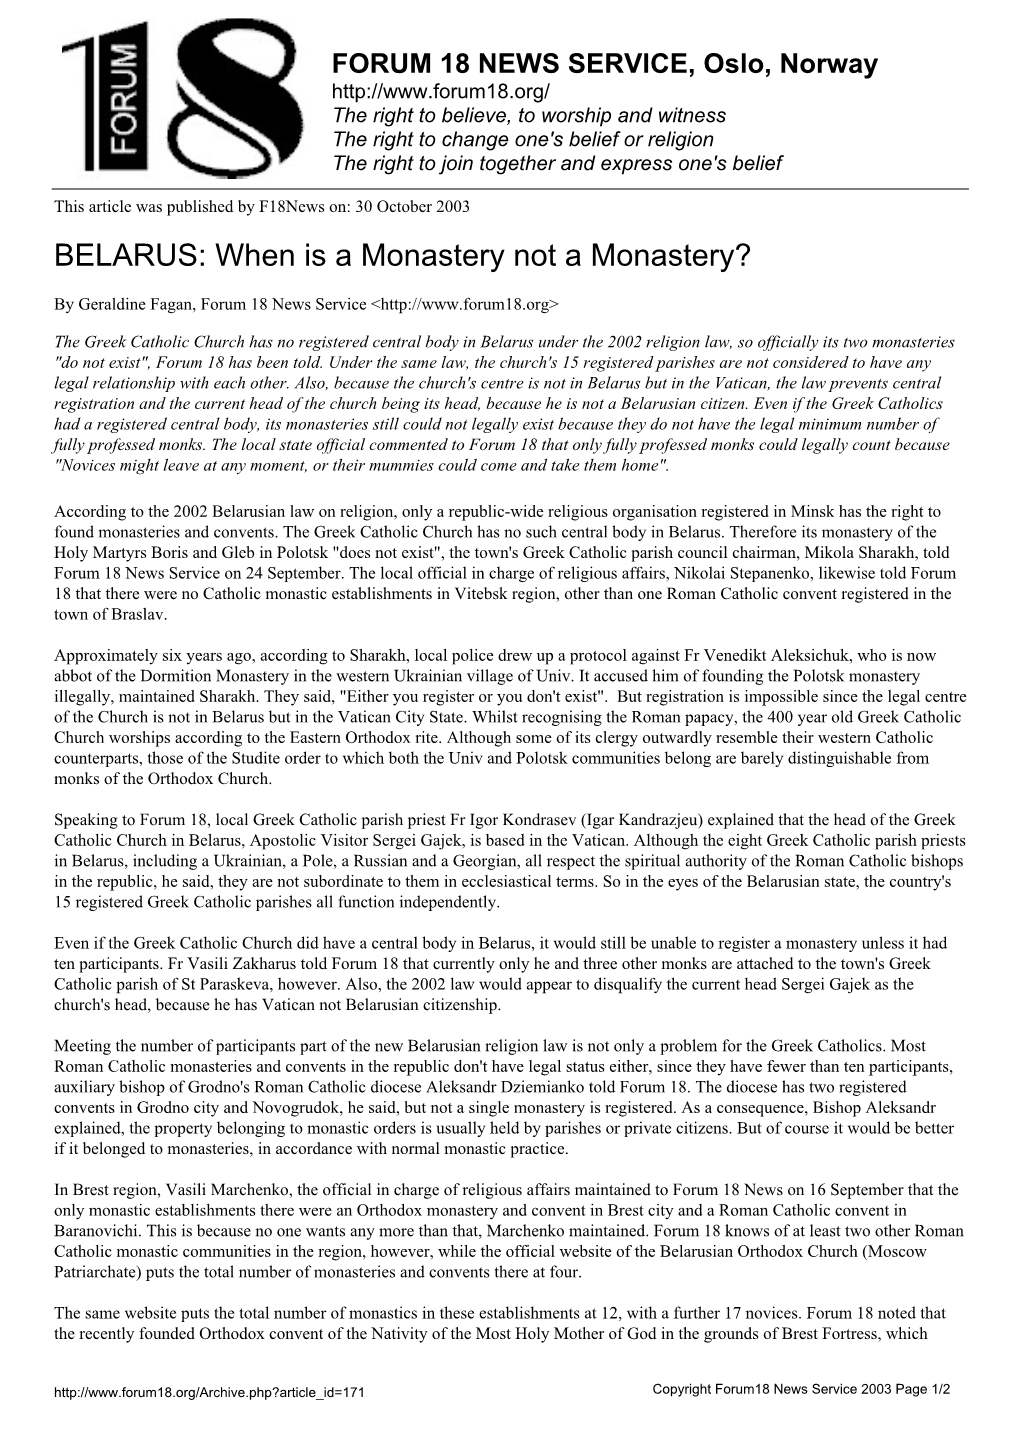 BELARUS: When Is a Monastery Not a Monastery?